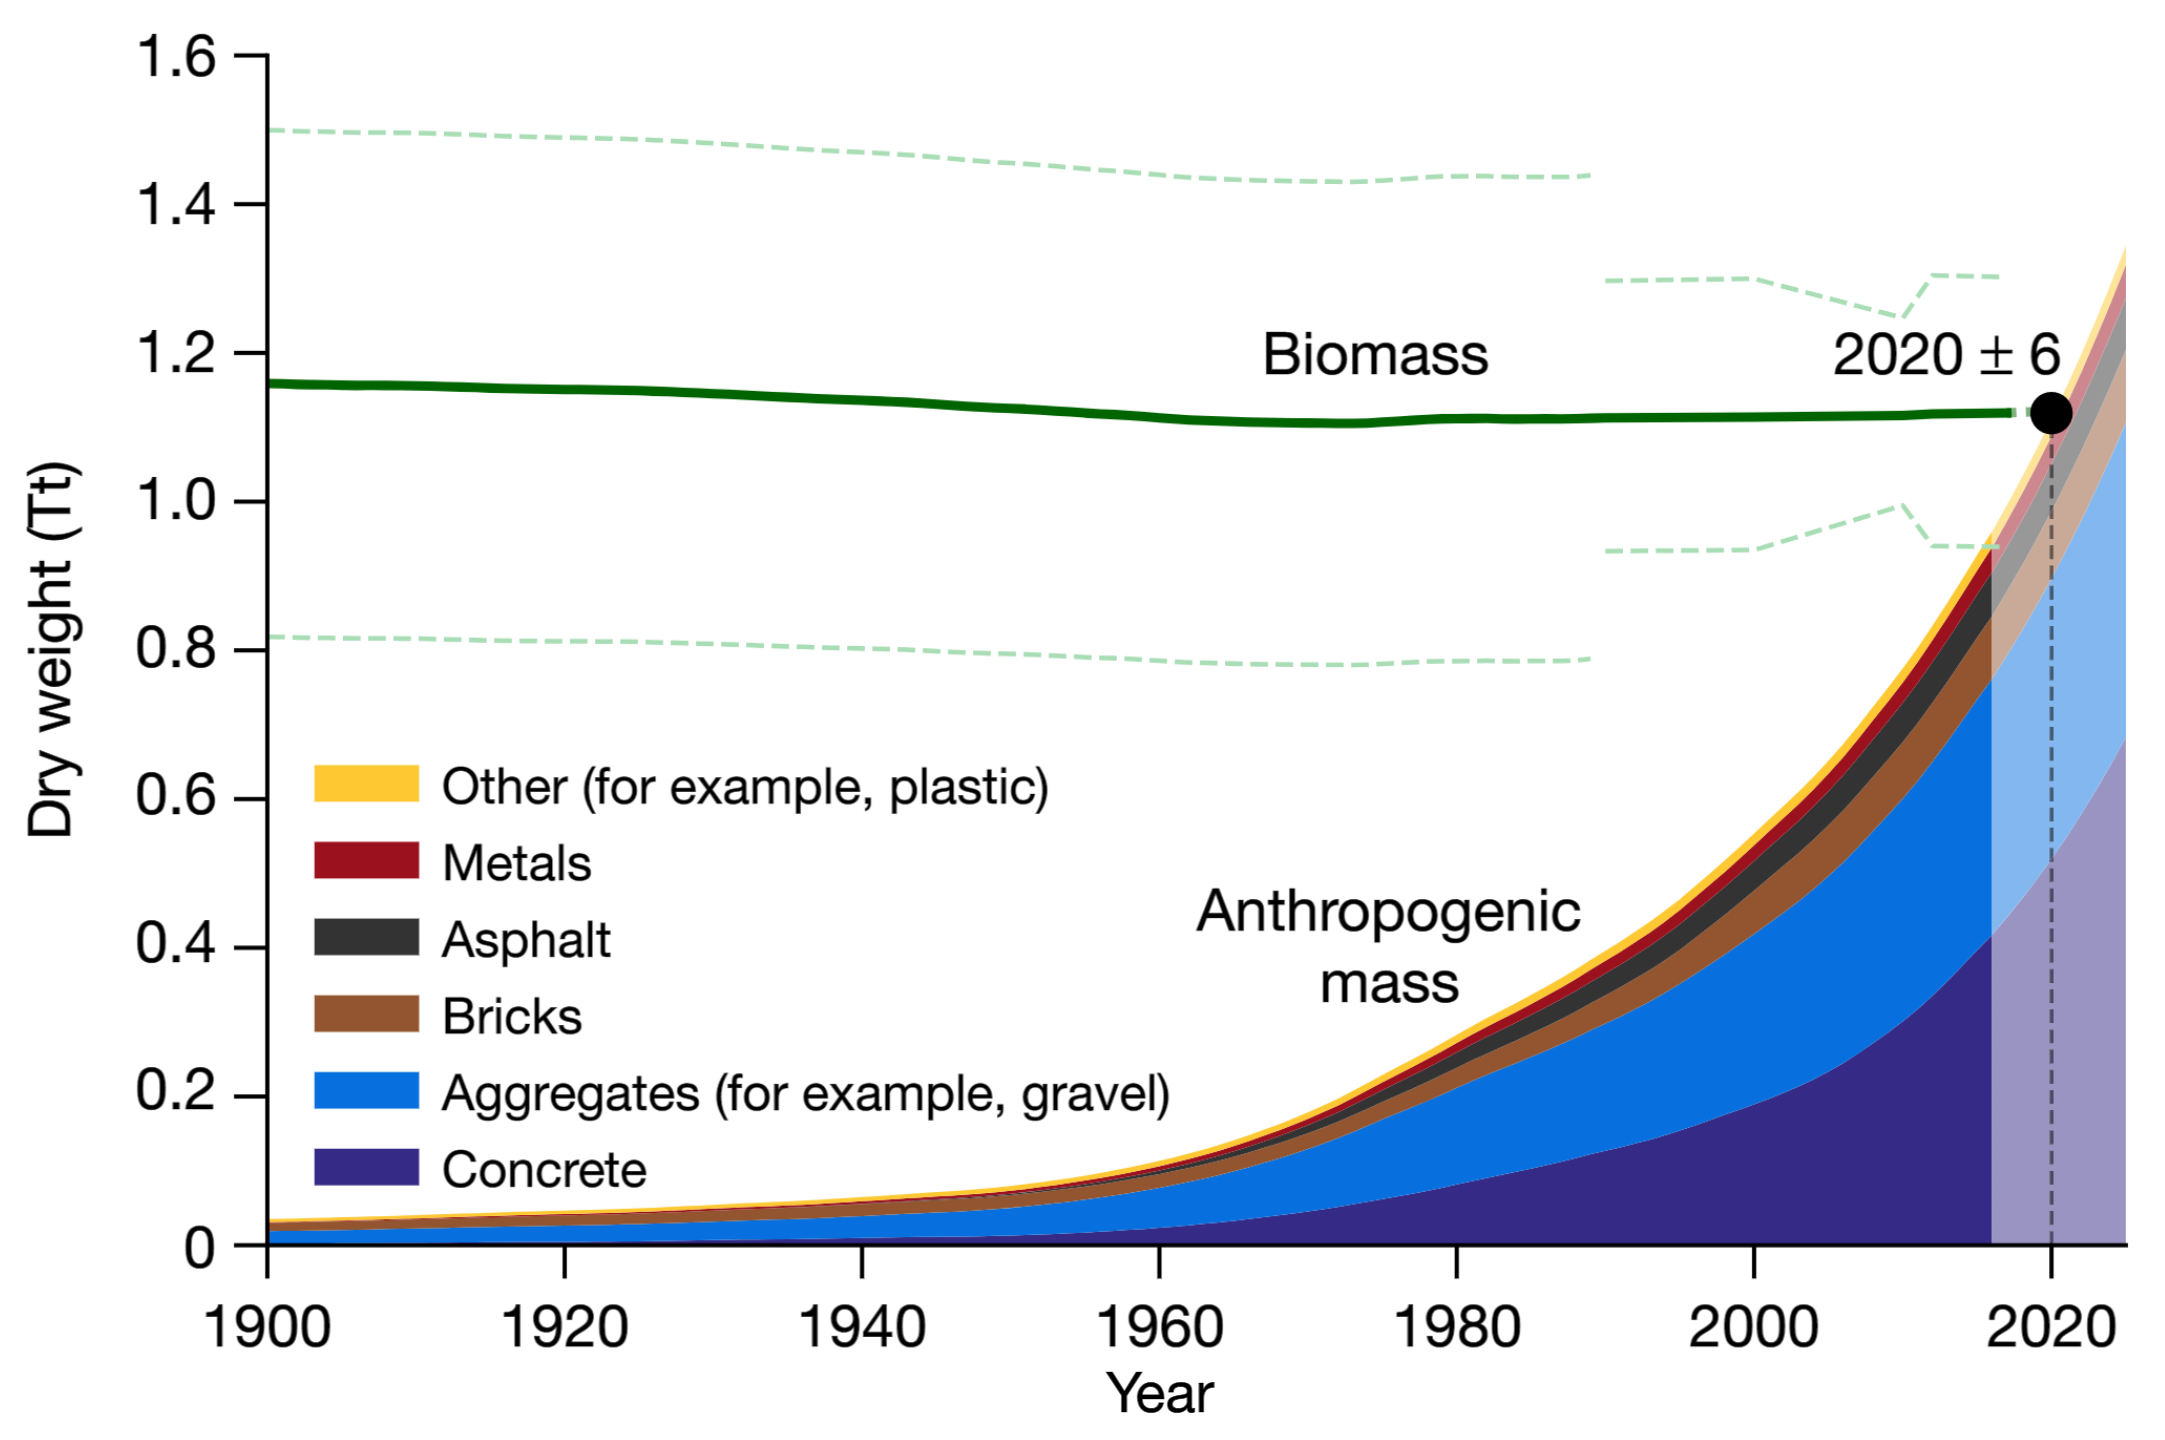 Biomass and anthropogenic mass estimates since the beginning of the twentieth century on a dry-mass basis. The green line shows the total weight of thebiomass (dashed green lines, ±1 s.d.). Anthropogenic mass weight is plotted as an area chart, where the heights of the coloured areas represent the mass of the corresponding category accumulated until that year. The anthropogenic mass presented here is grouped into six major categories. The year 2020±6 marks the time at which biomass is exceeded by anthropogenic mass. Anthropogenic mass data since 1900 were obtained from ref. 22, at a single-year resolution. The current biomass value is based on ref. 11, which for plants relies on the estimate of ref. 10, which updates earlier, mostly higher estimates. The uncertainty of the year of intersection was derived using a Monte Carlo simulation, with 10,000 repeats. Data were extrapolated for the years 2015–2025 (lighter area). Graphic: Elhacham, et al., 2020 / Nature